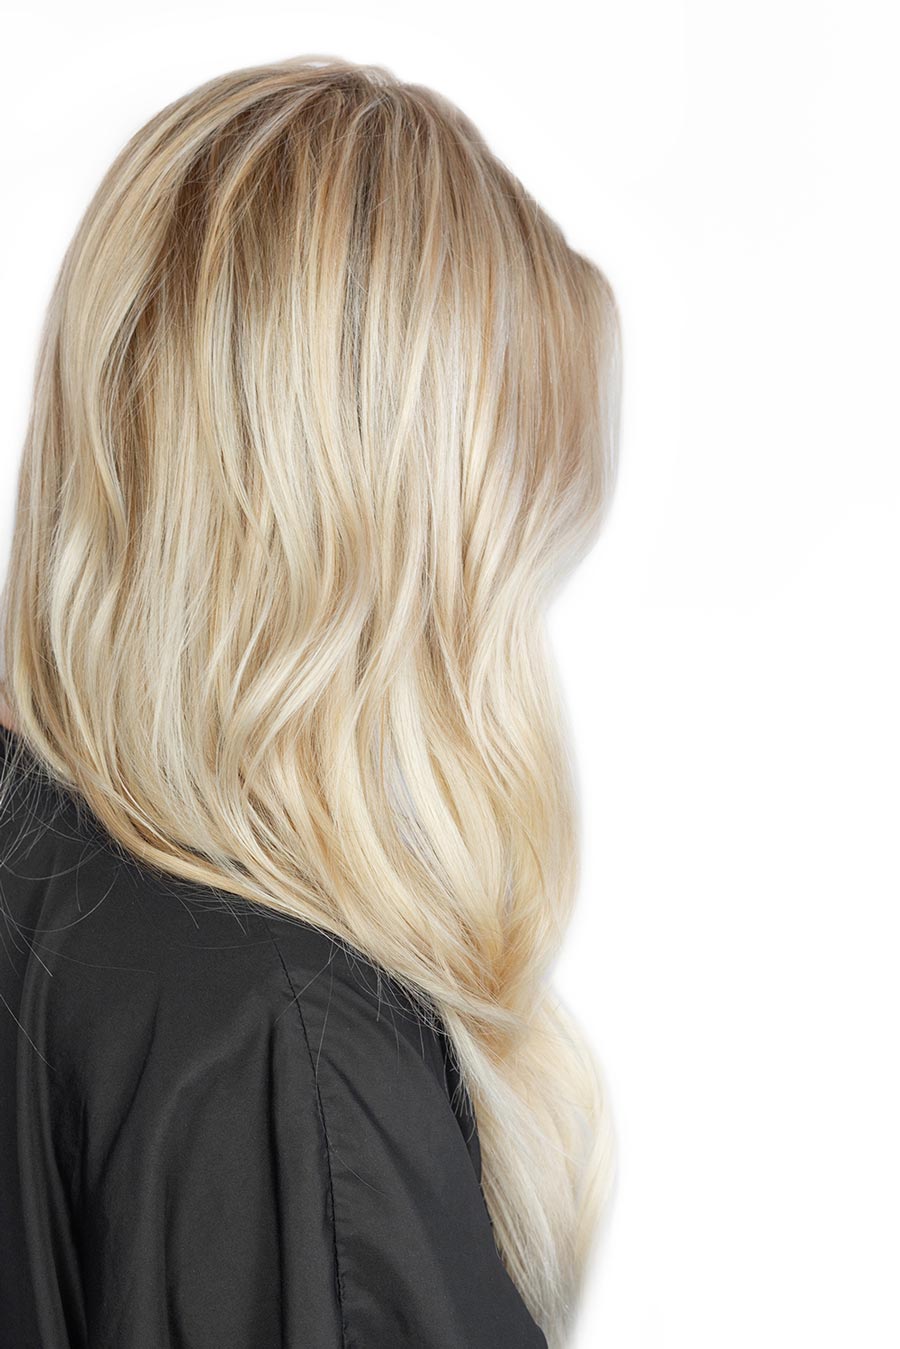 All the ways you are damaging your hair according to a celeb stylist